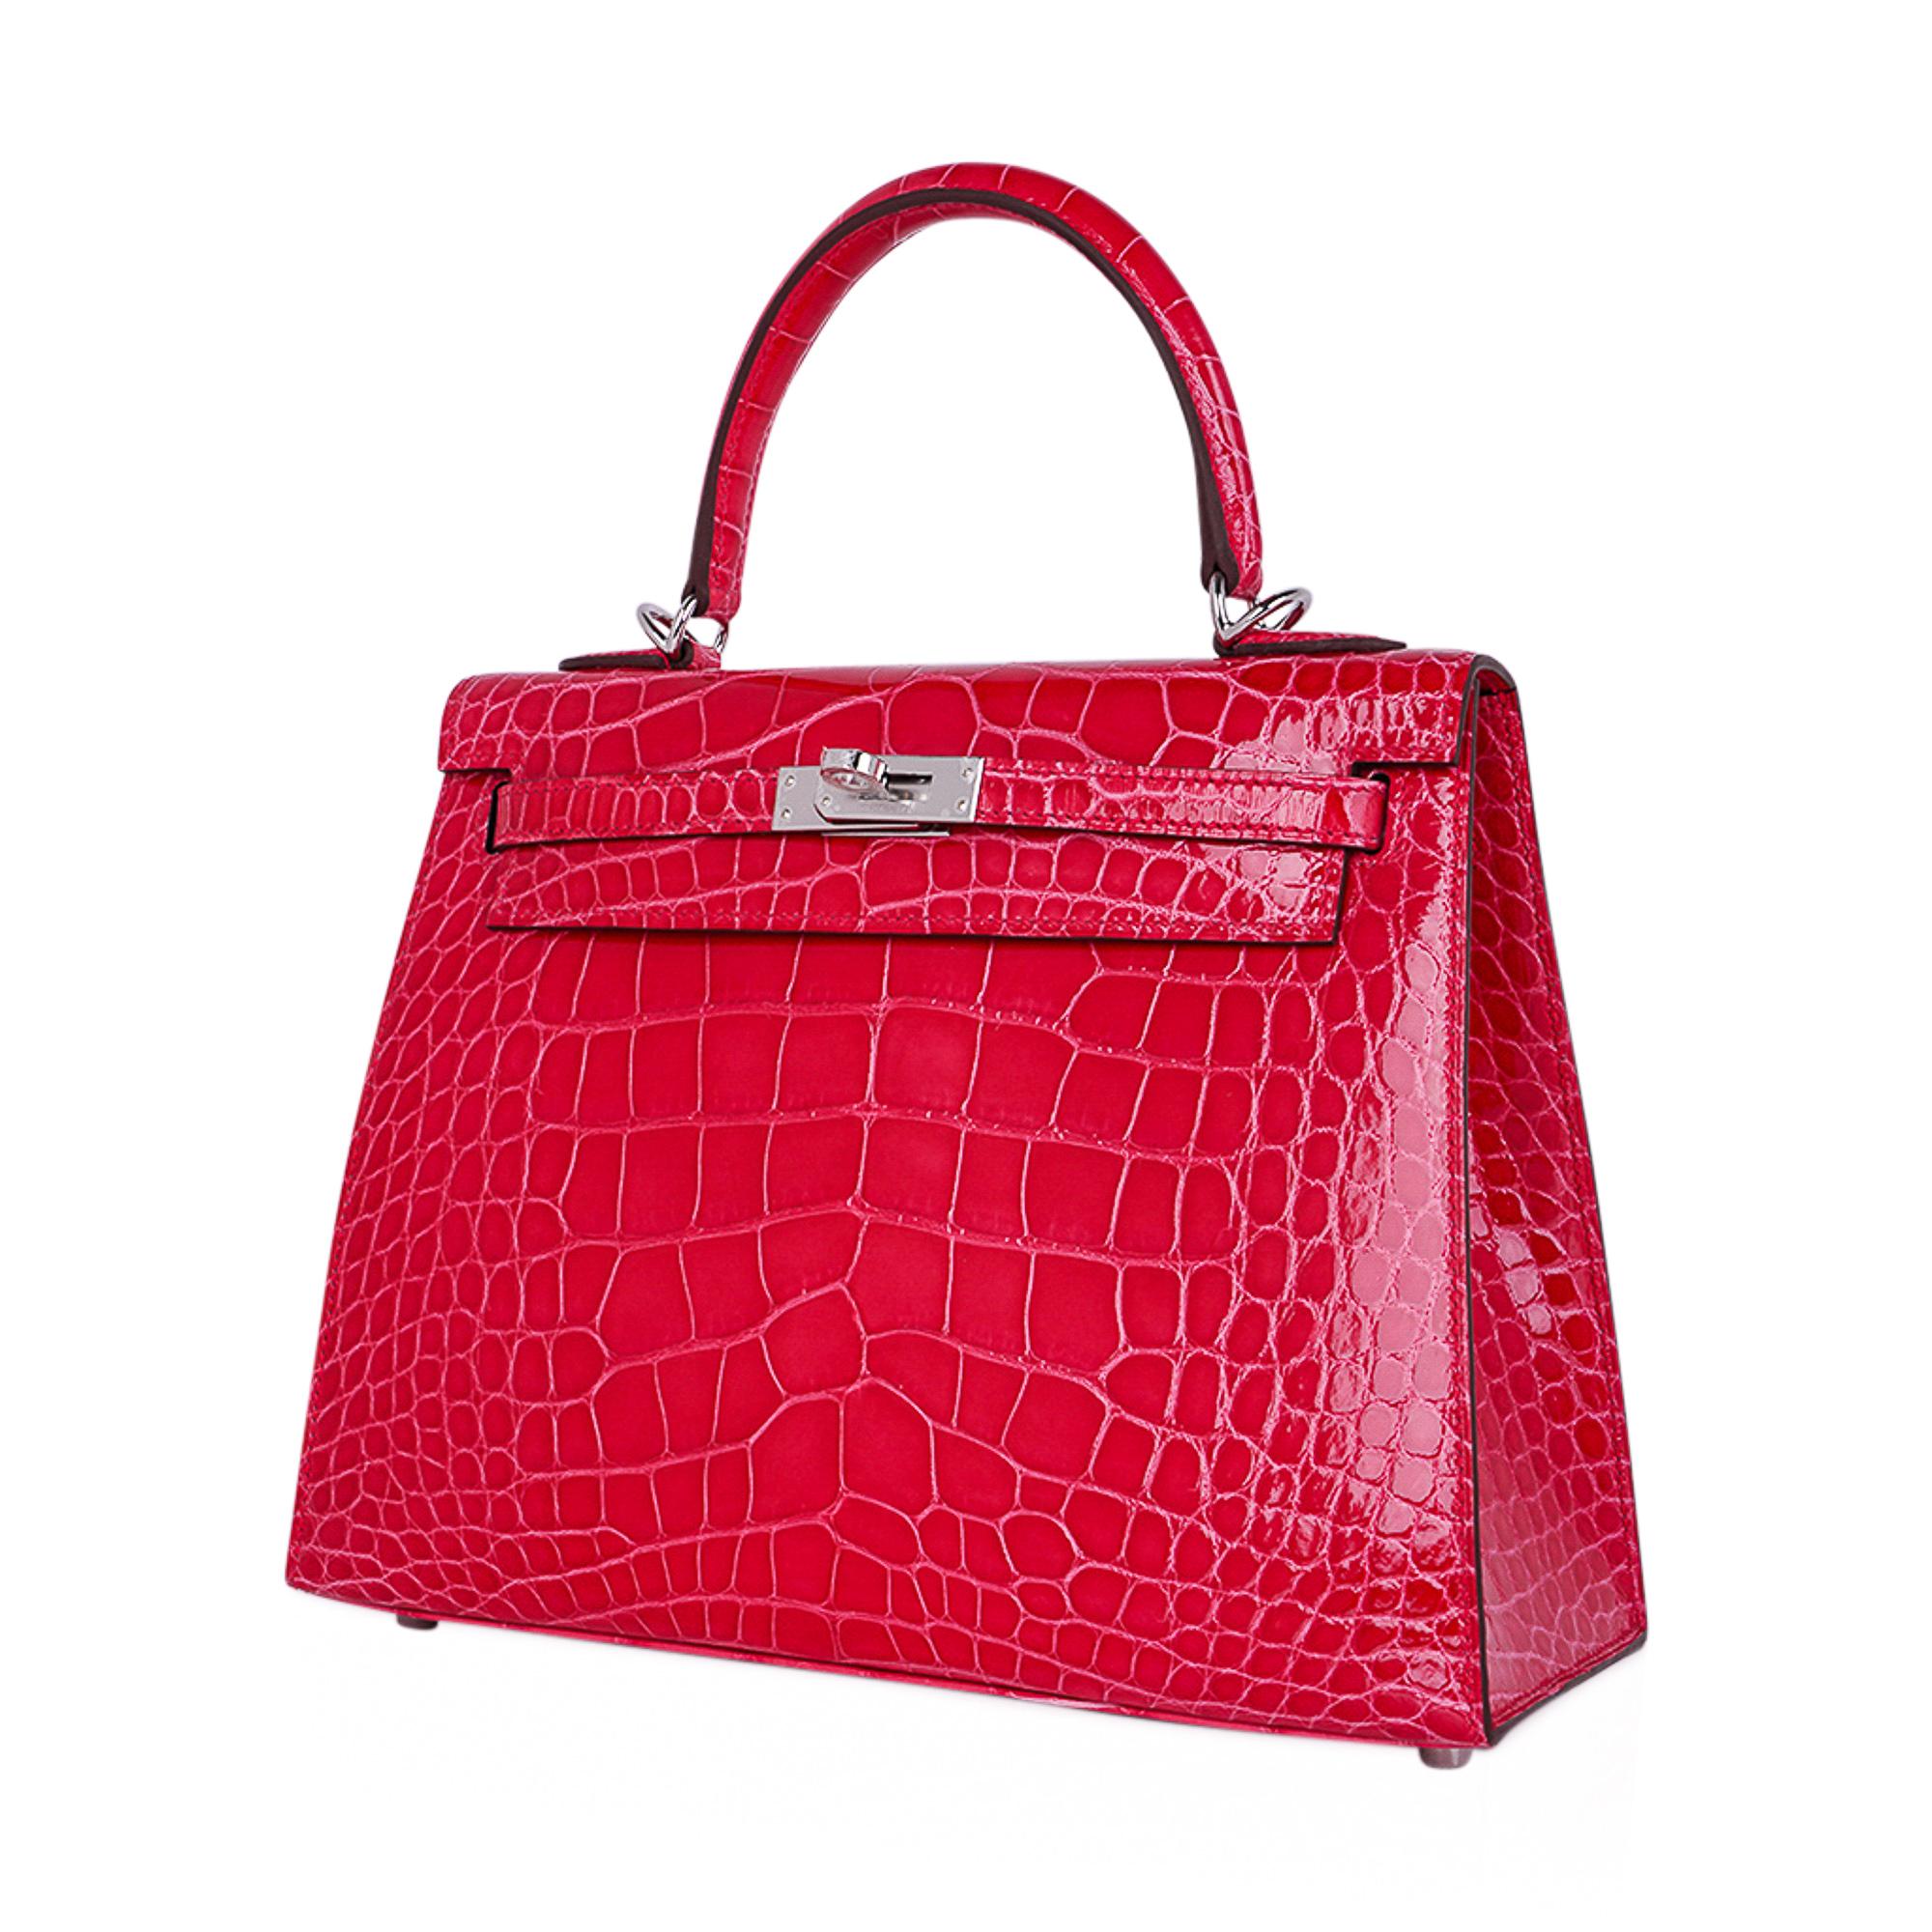 Mightychic offers an Hermes Kelly Sellier HSS 25 bag featured in Rose Extreme Alligator with Trench interior.
Stunning Kelly accentuated with fresh Palladium hardware.
Comes with signature Hermes box, raincoat, shoulder strap, sleepers, lock, keys